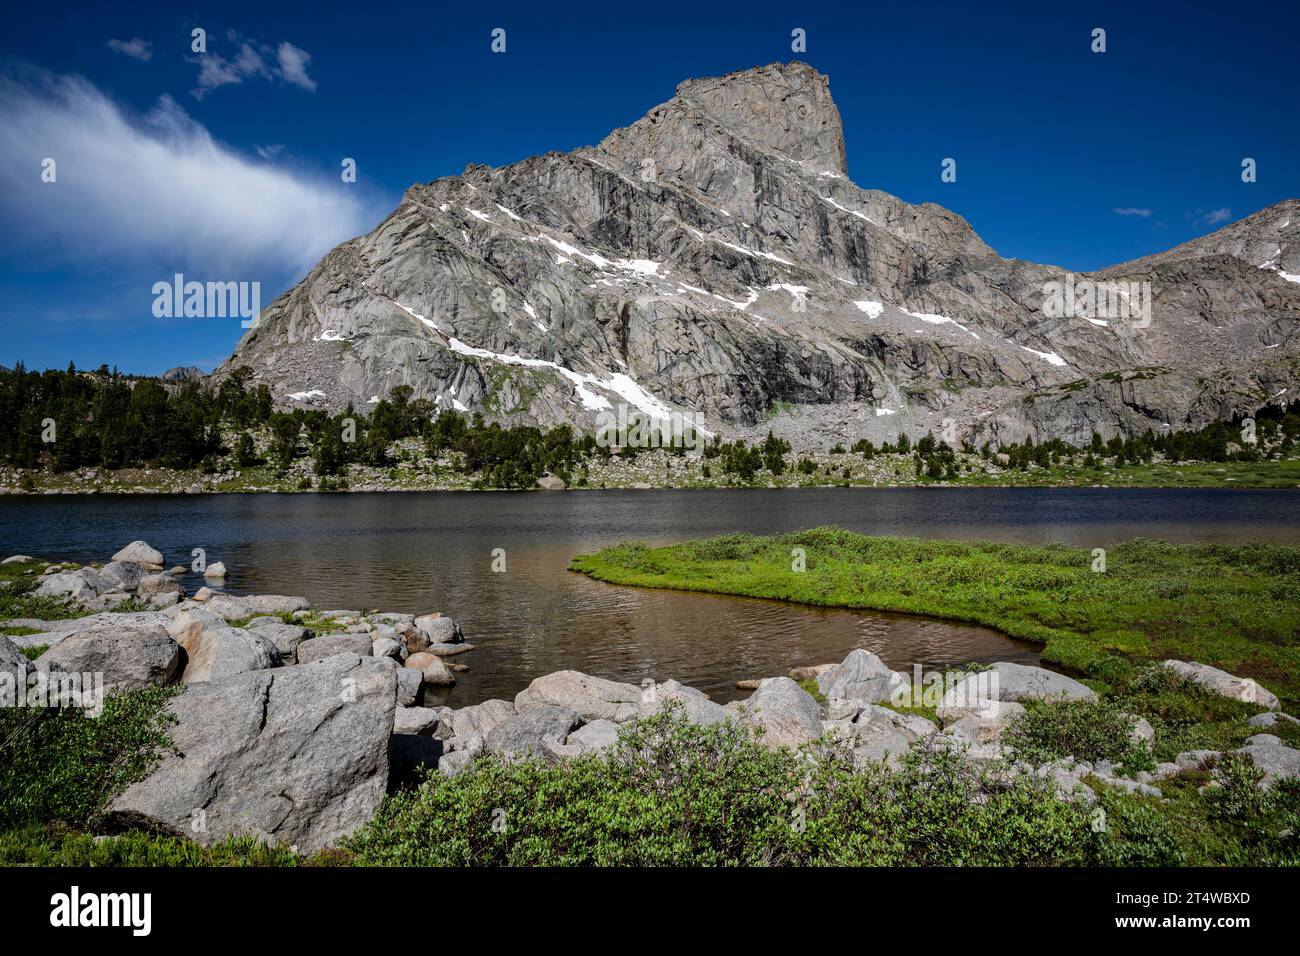 WA05566-00...WYOMING - The first Bear Lake and Lizard Head Peak in the Popo Agie Wilderness section of the Wind River Range. Stock Photo